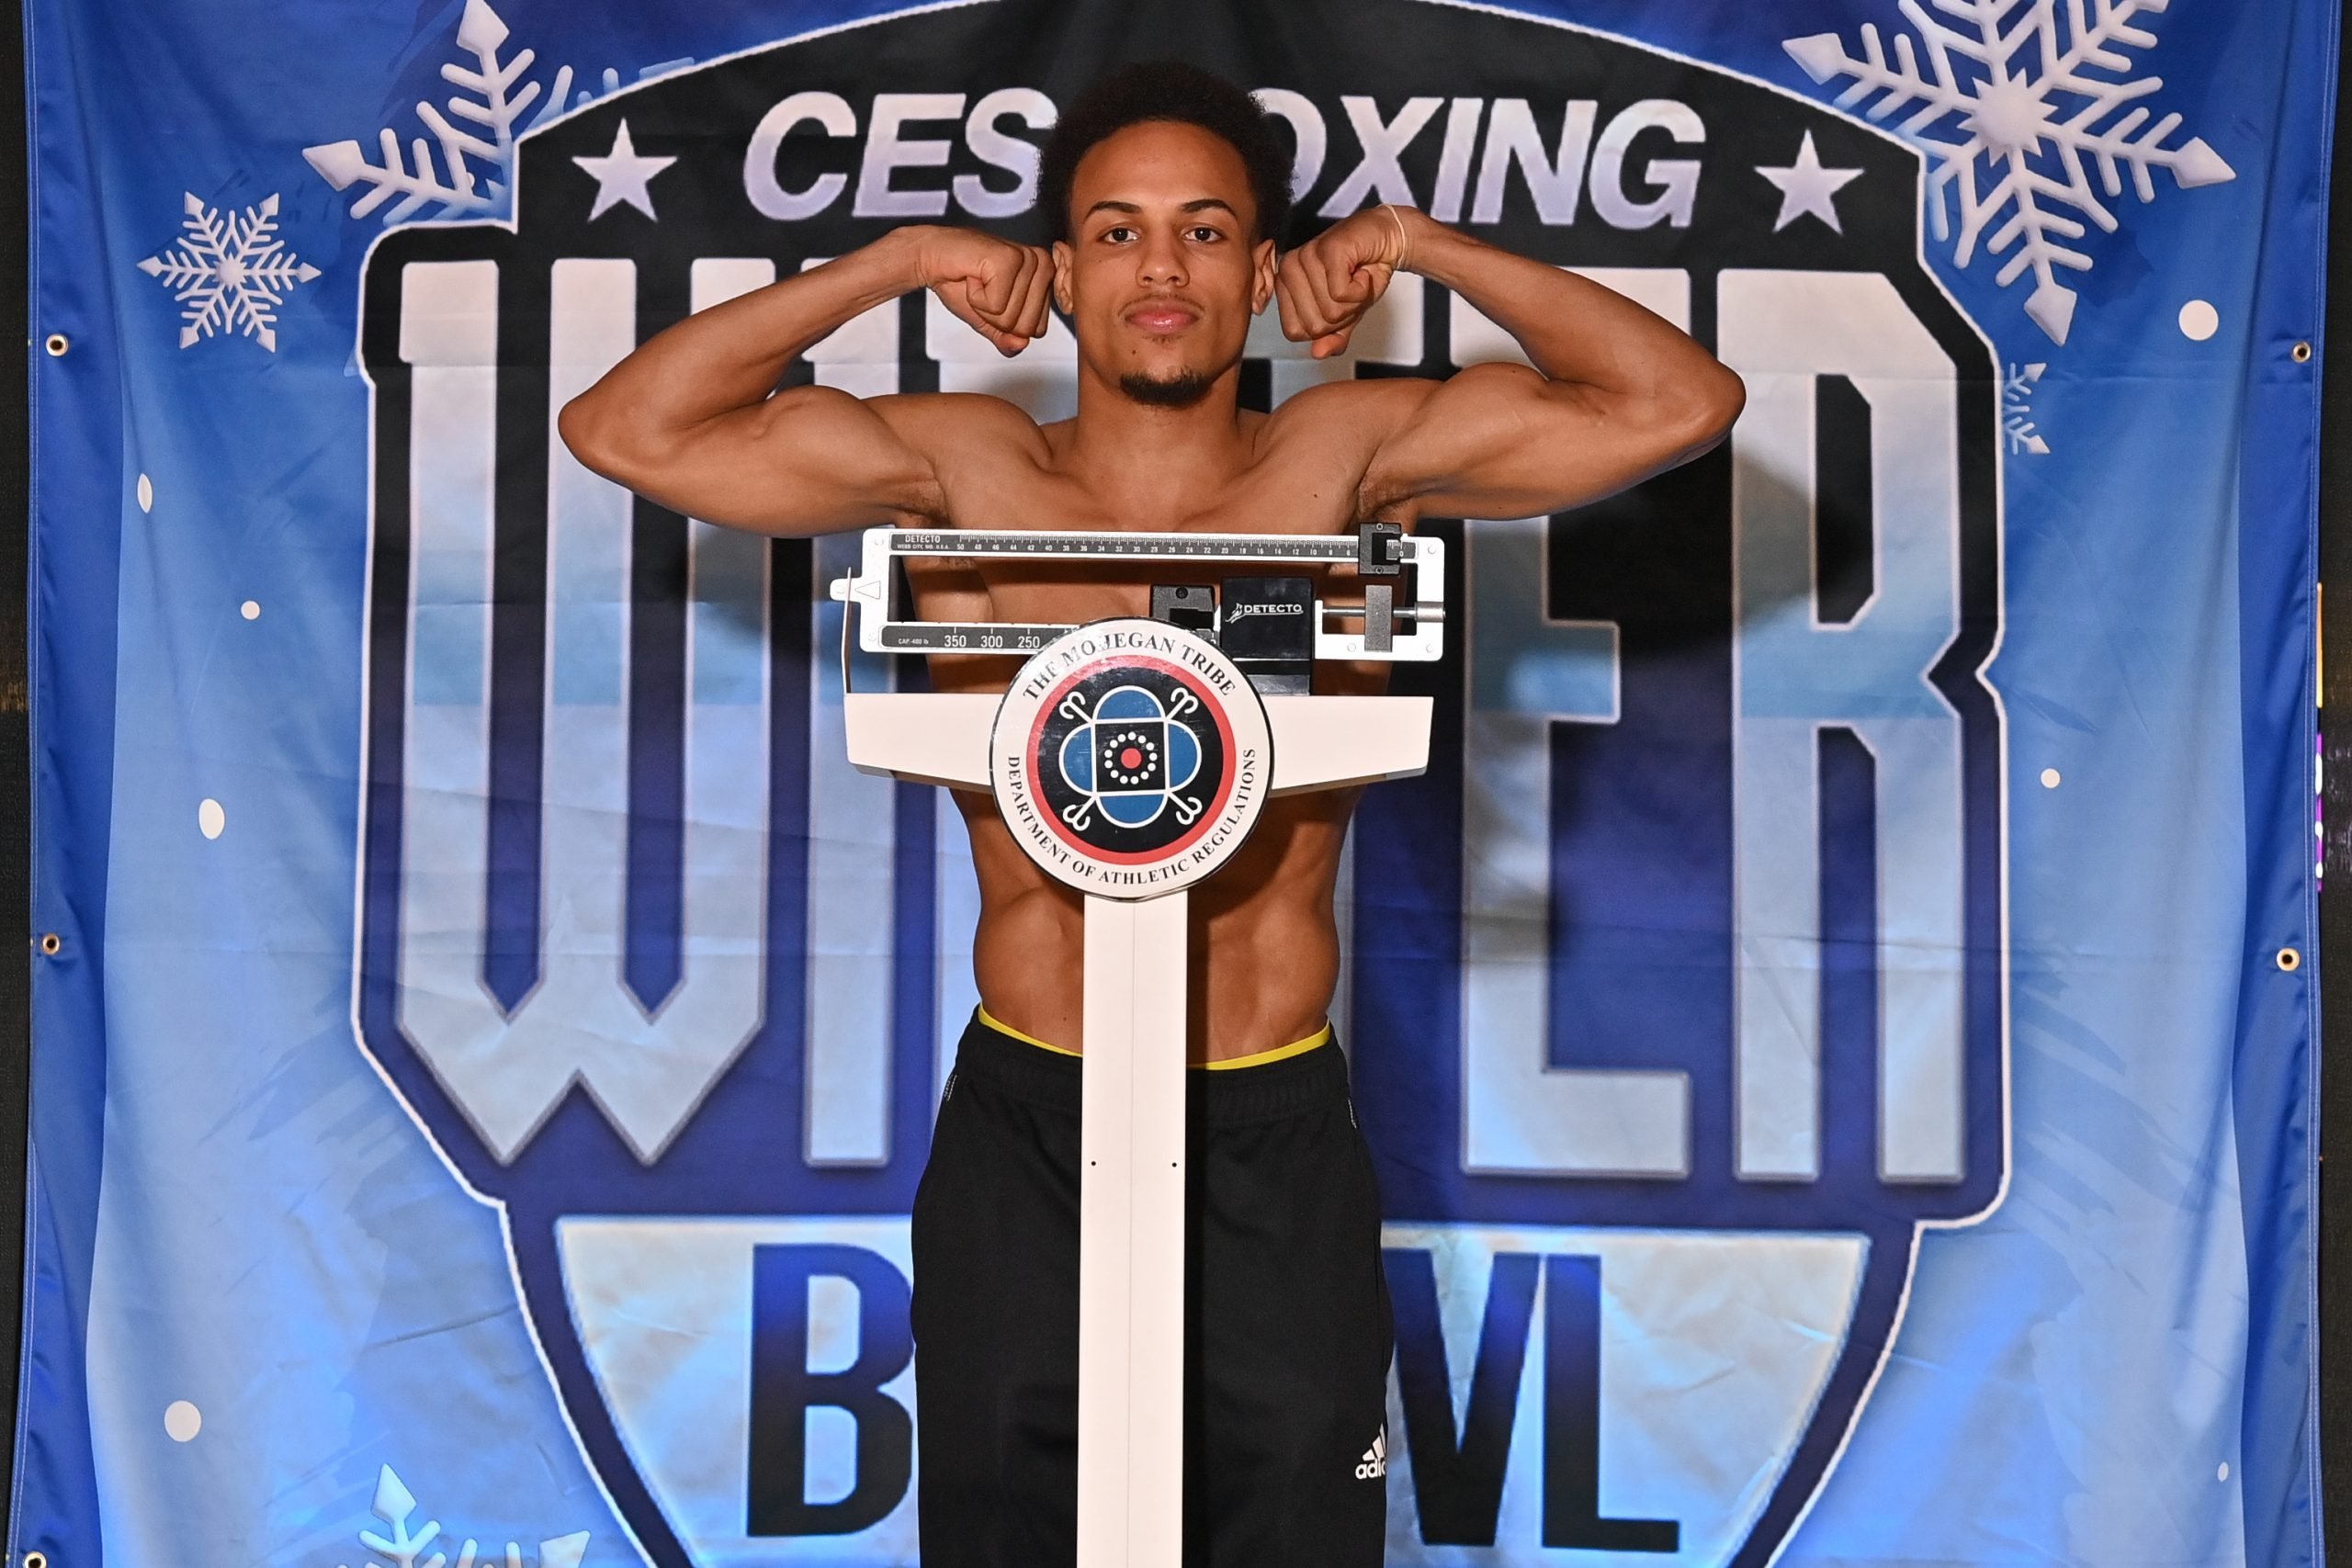 Dominican prospect Alejandro Paulino faces first step-up opponent against D’Angelo Keyes